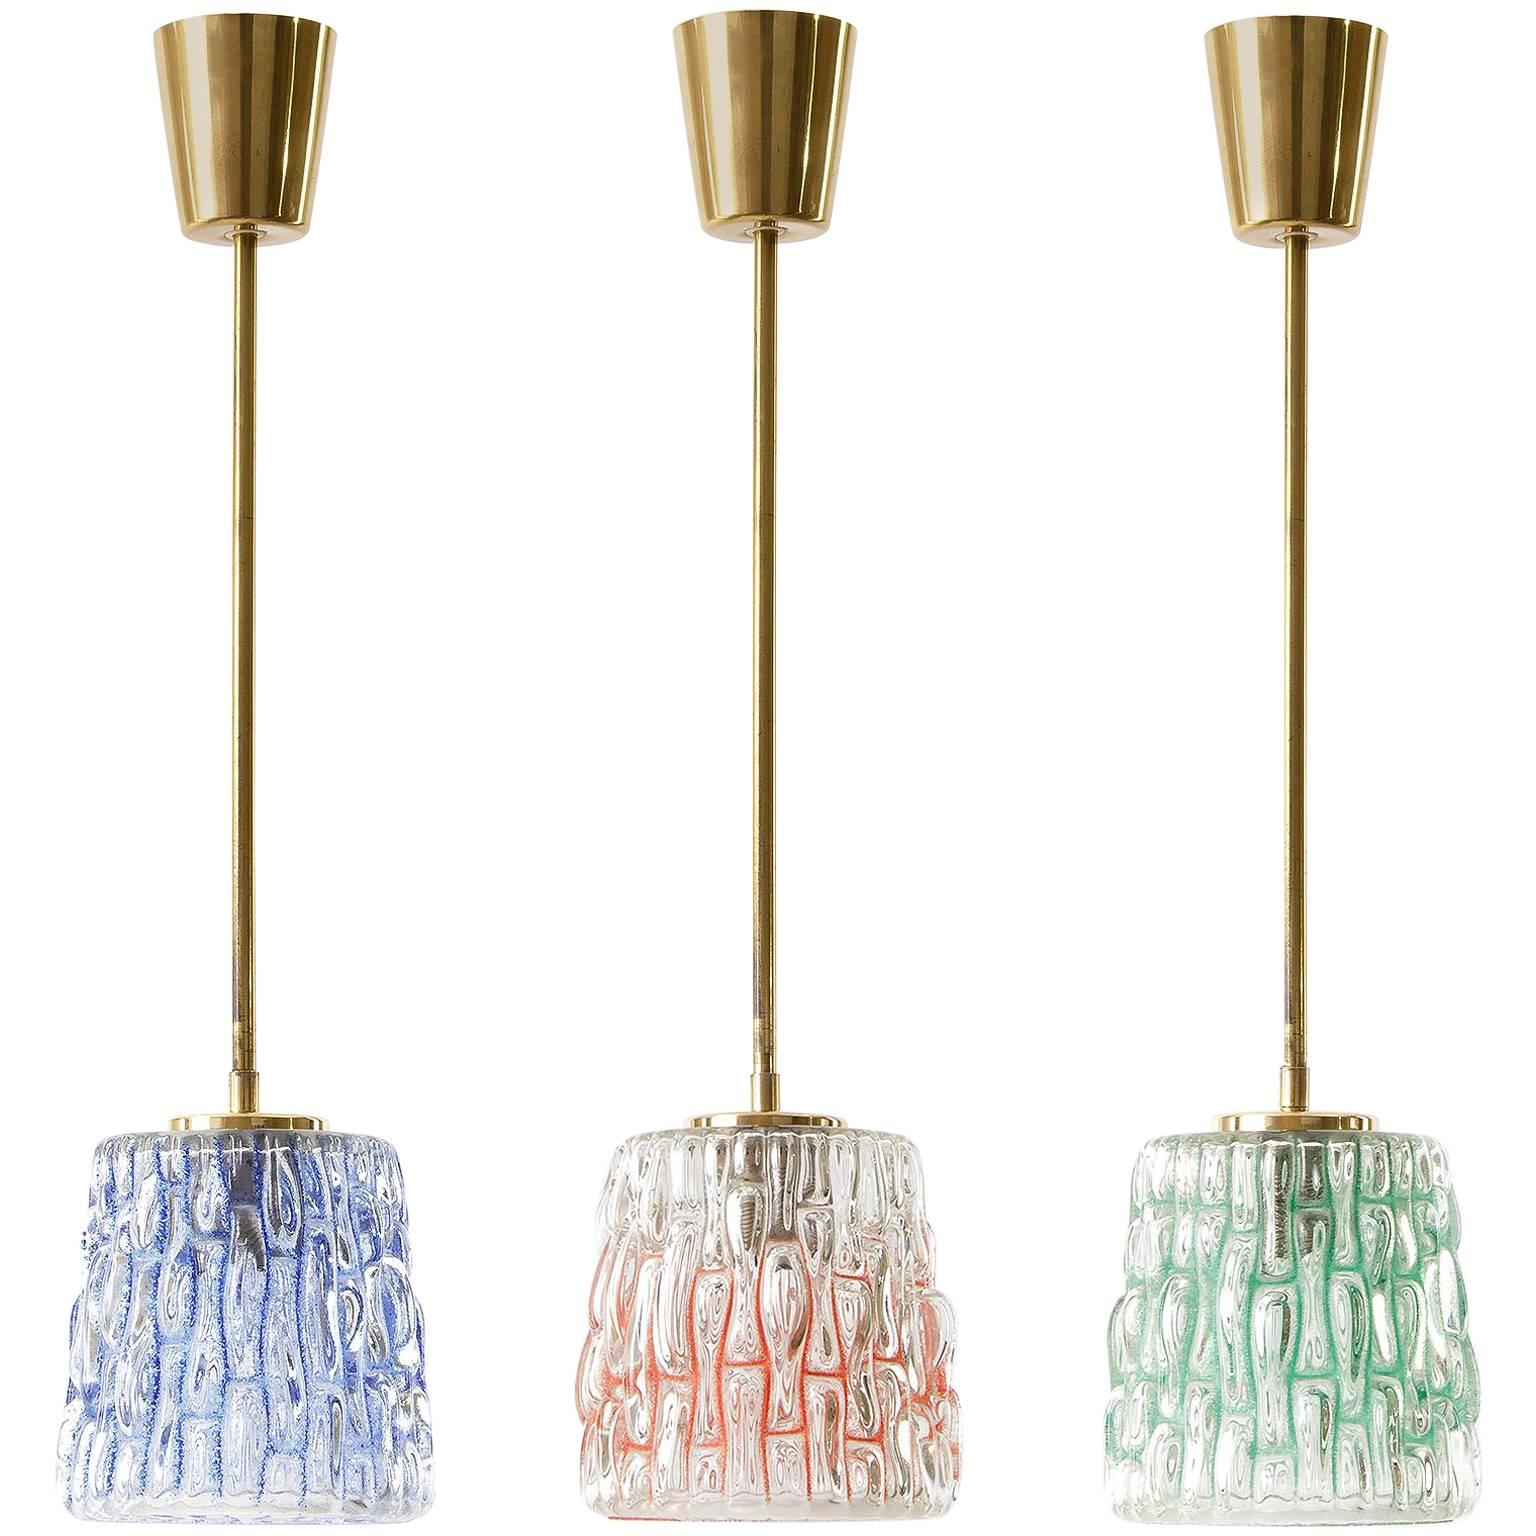 Three Colorful Glass and Brass Pendant Lights by Rupert Nikoll, Austria, 1950s For Sale